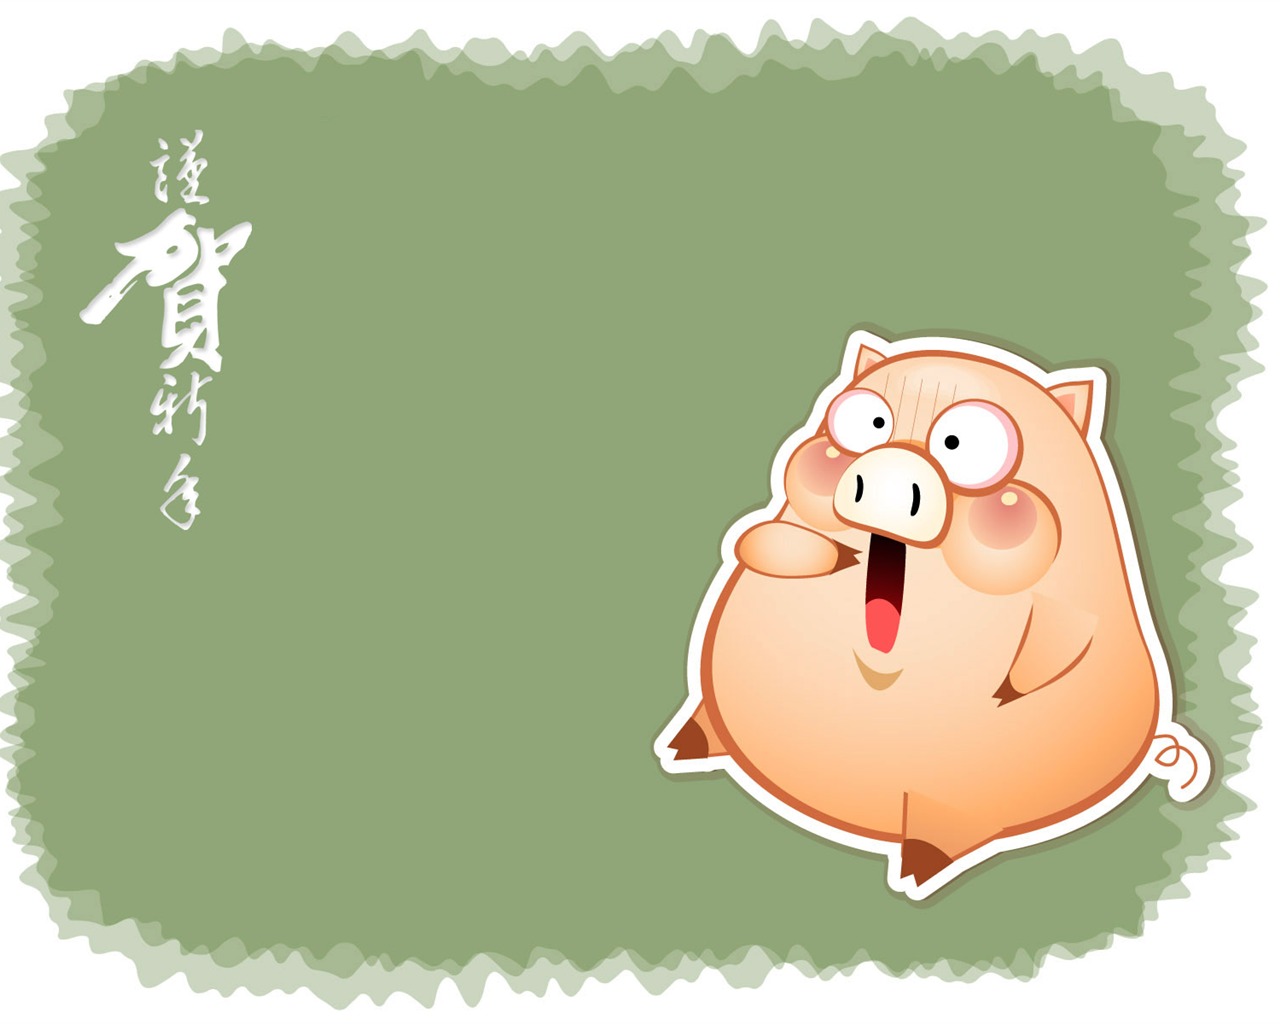 Year of the Pig Theme Wallpaper #12 - 1280x1024